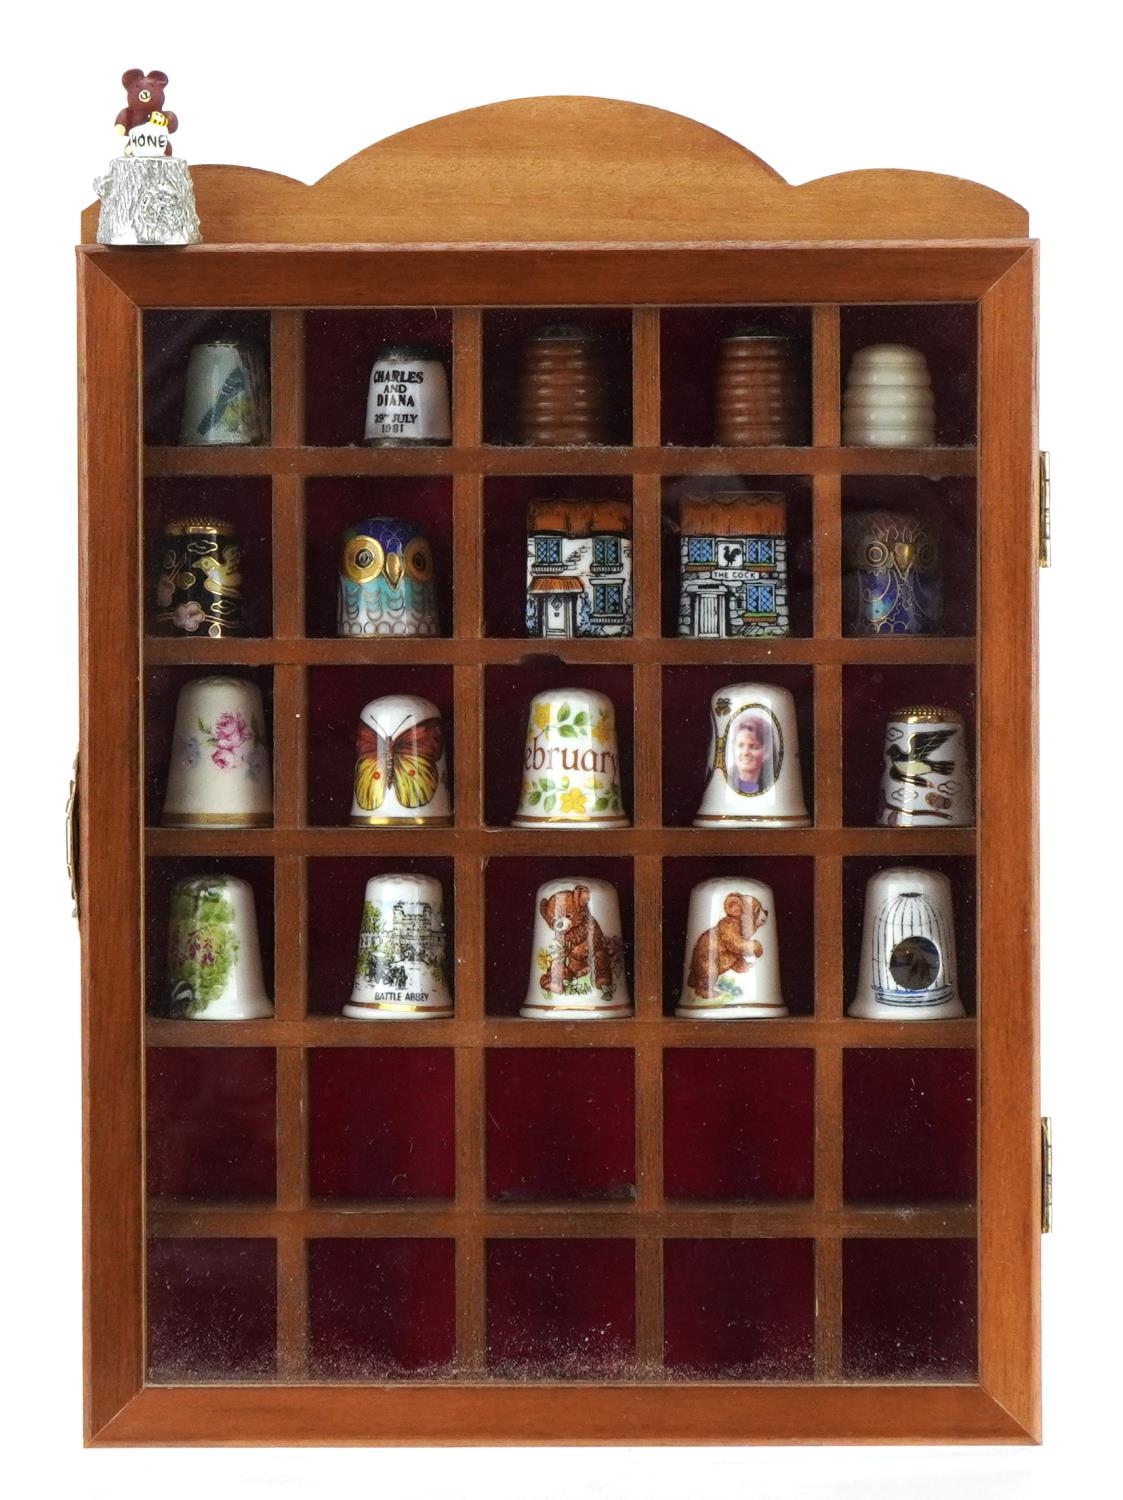 Twenty one thimbles housed in a display case including two silver and enamel and five cloisonne